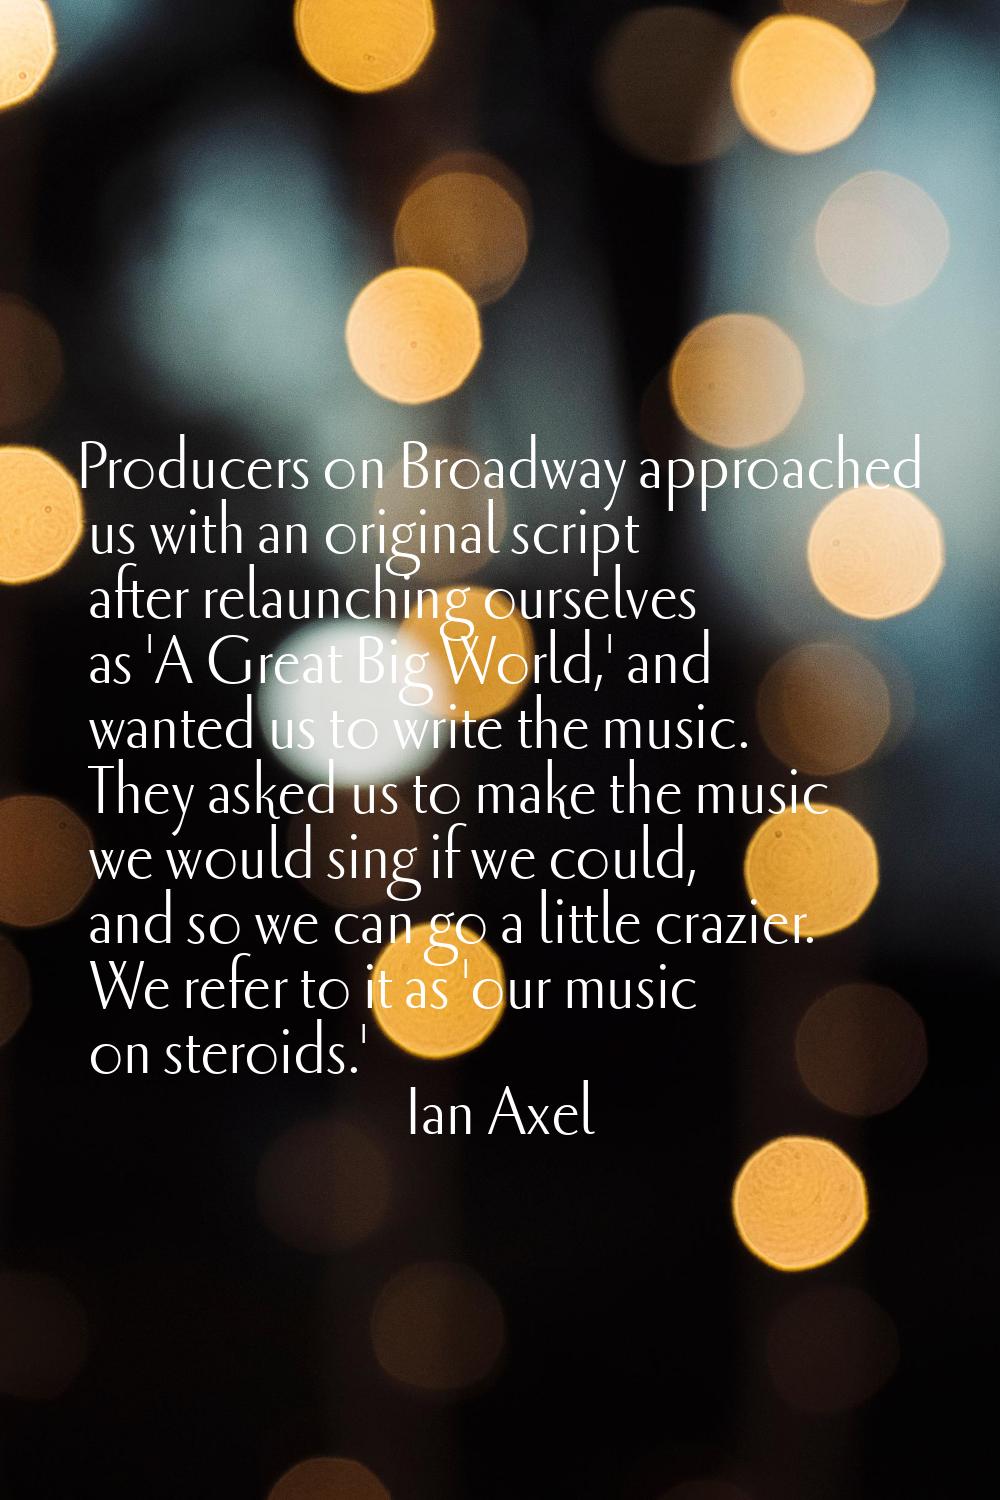 Producers on Broadway approached us with an original script after relaunching ourselves as 'A Great